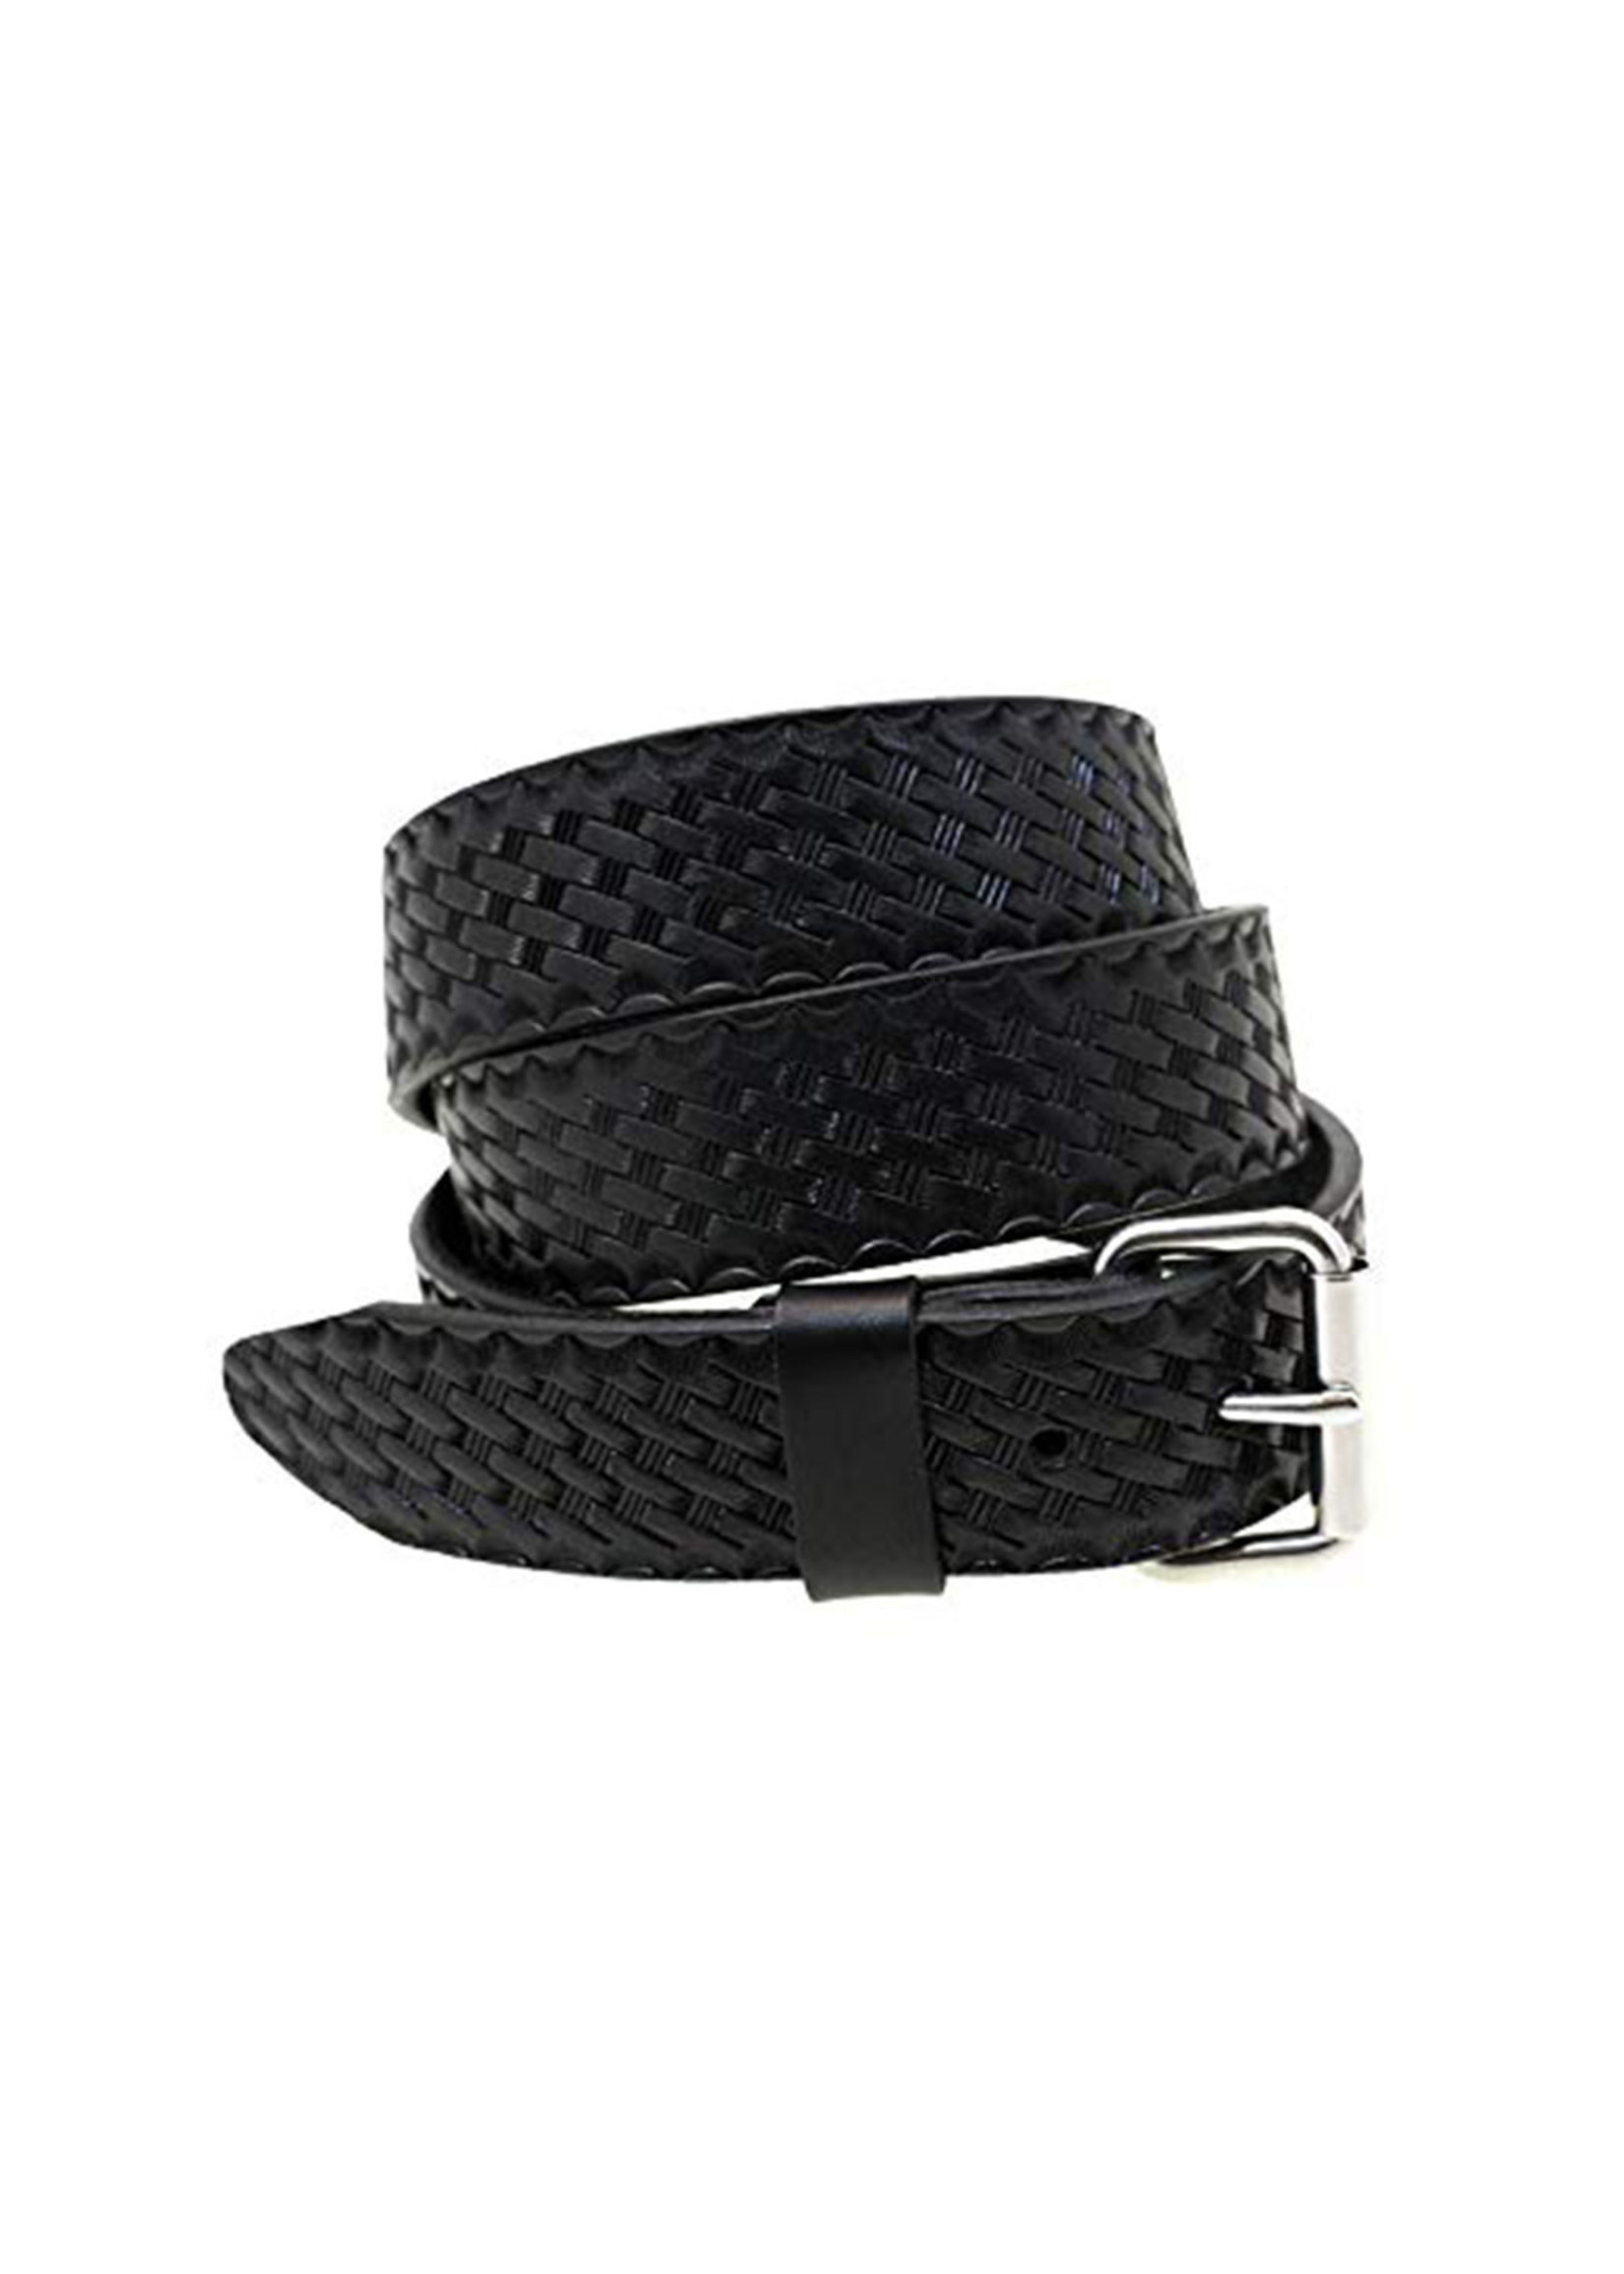 Black basket weave belt with silver buckle - Unified Fire Authority